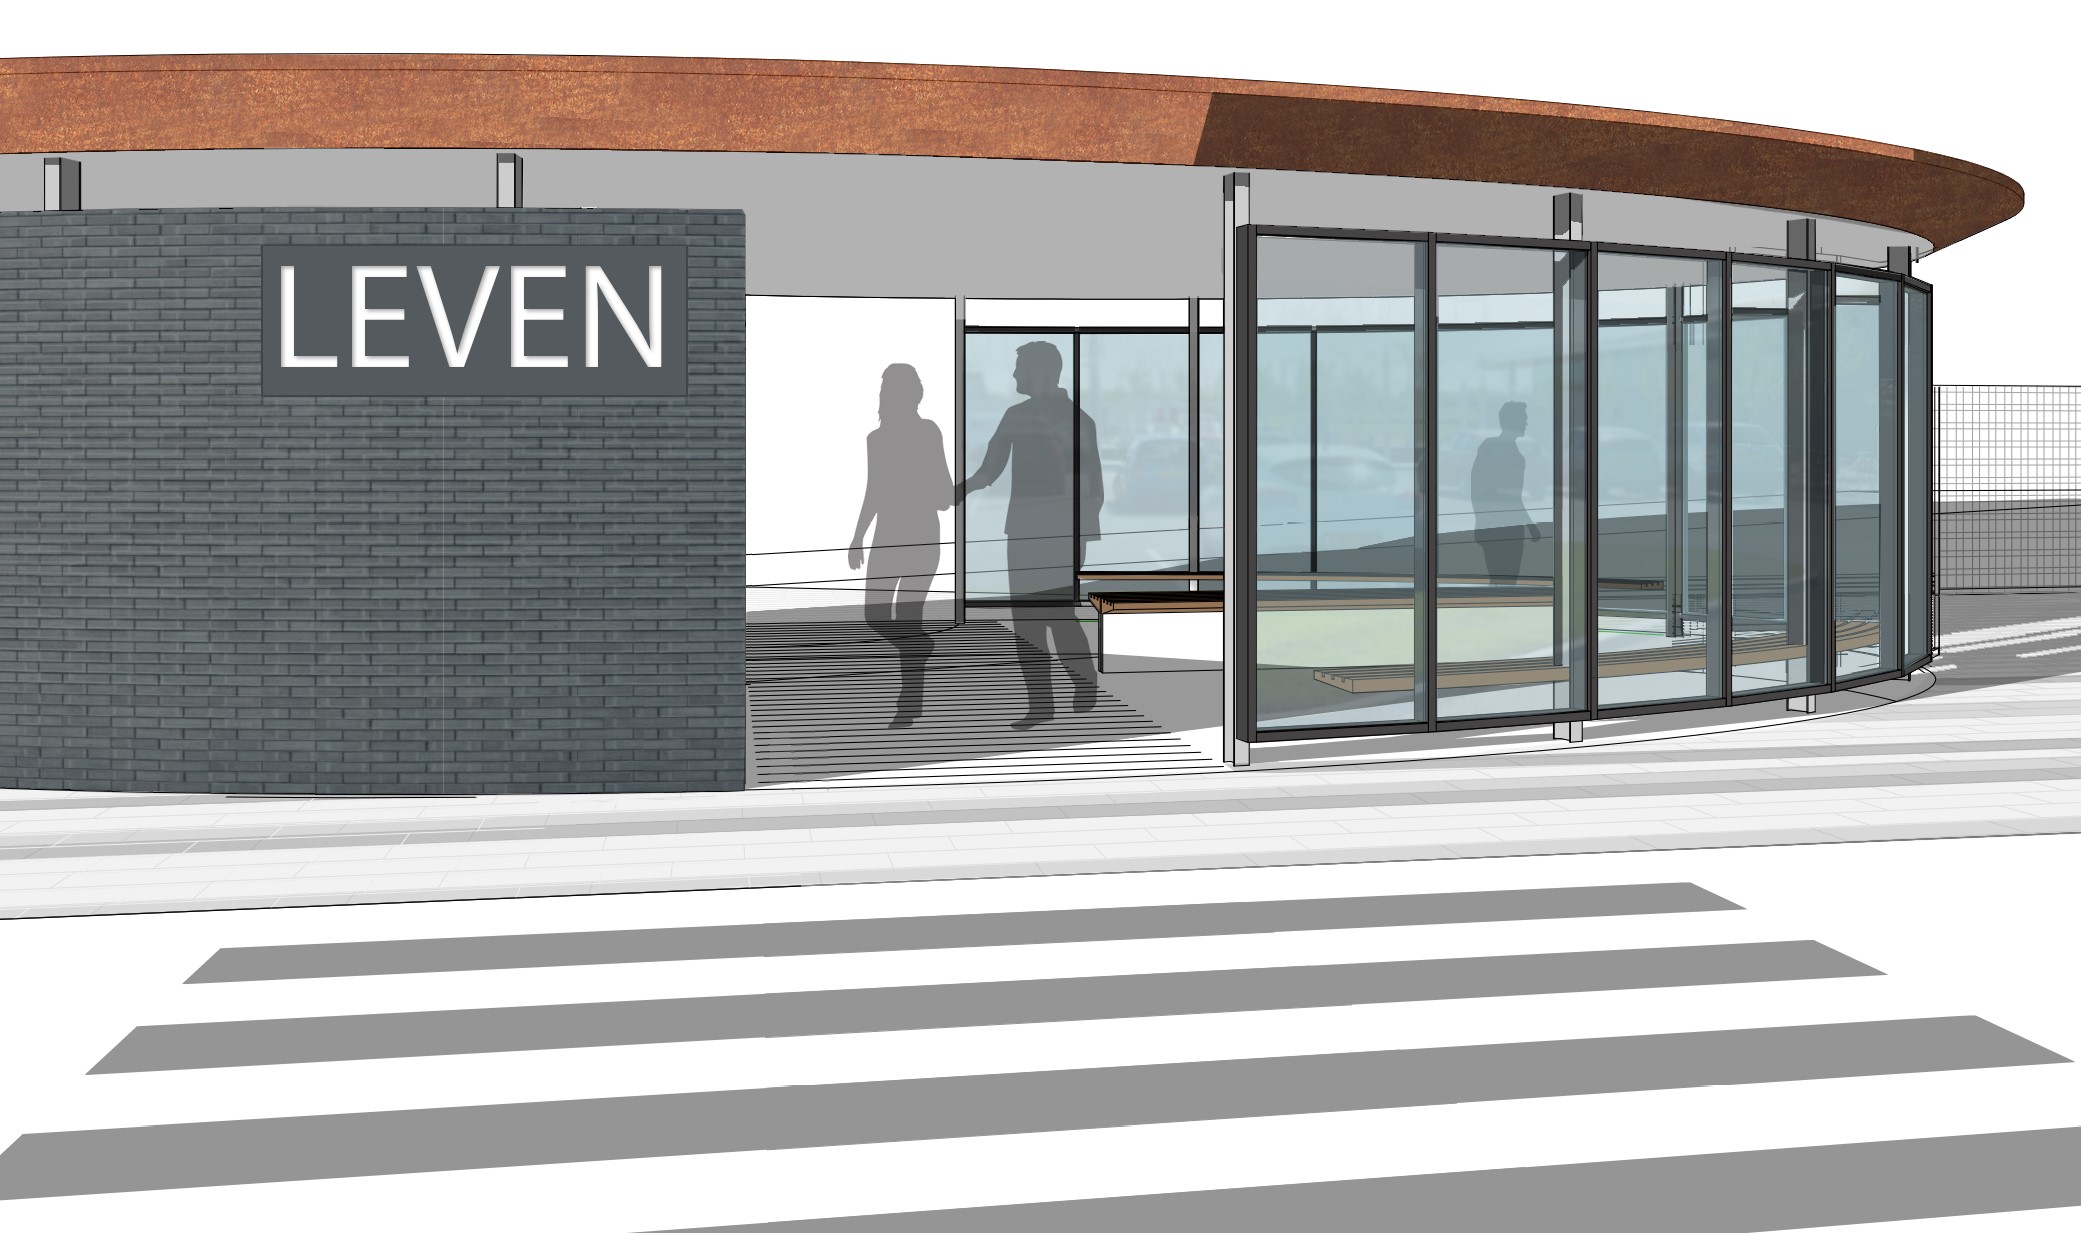 Levenmouth station designs to be unveiled